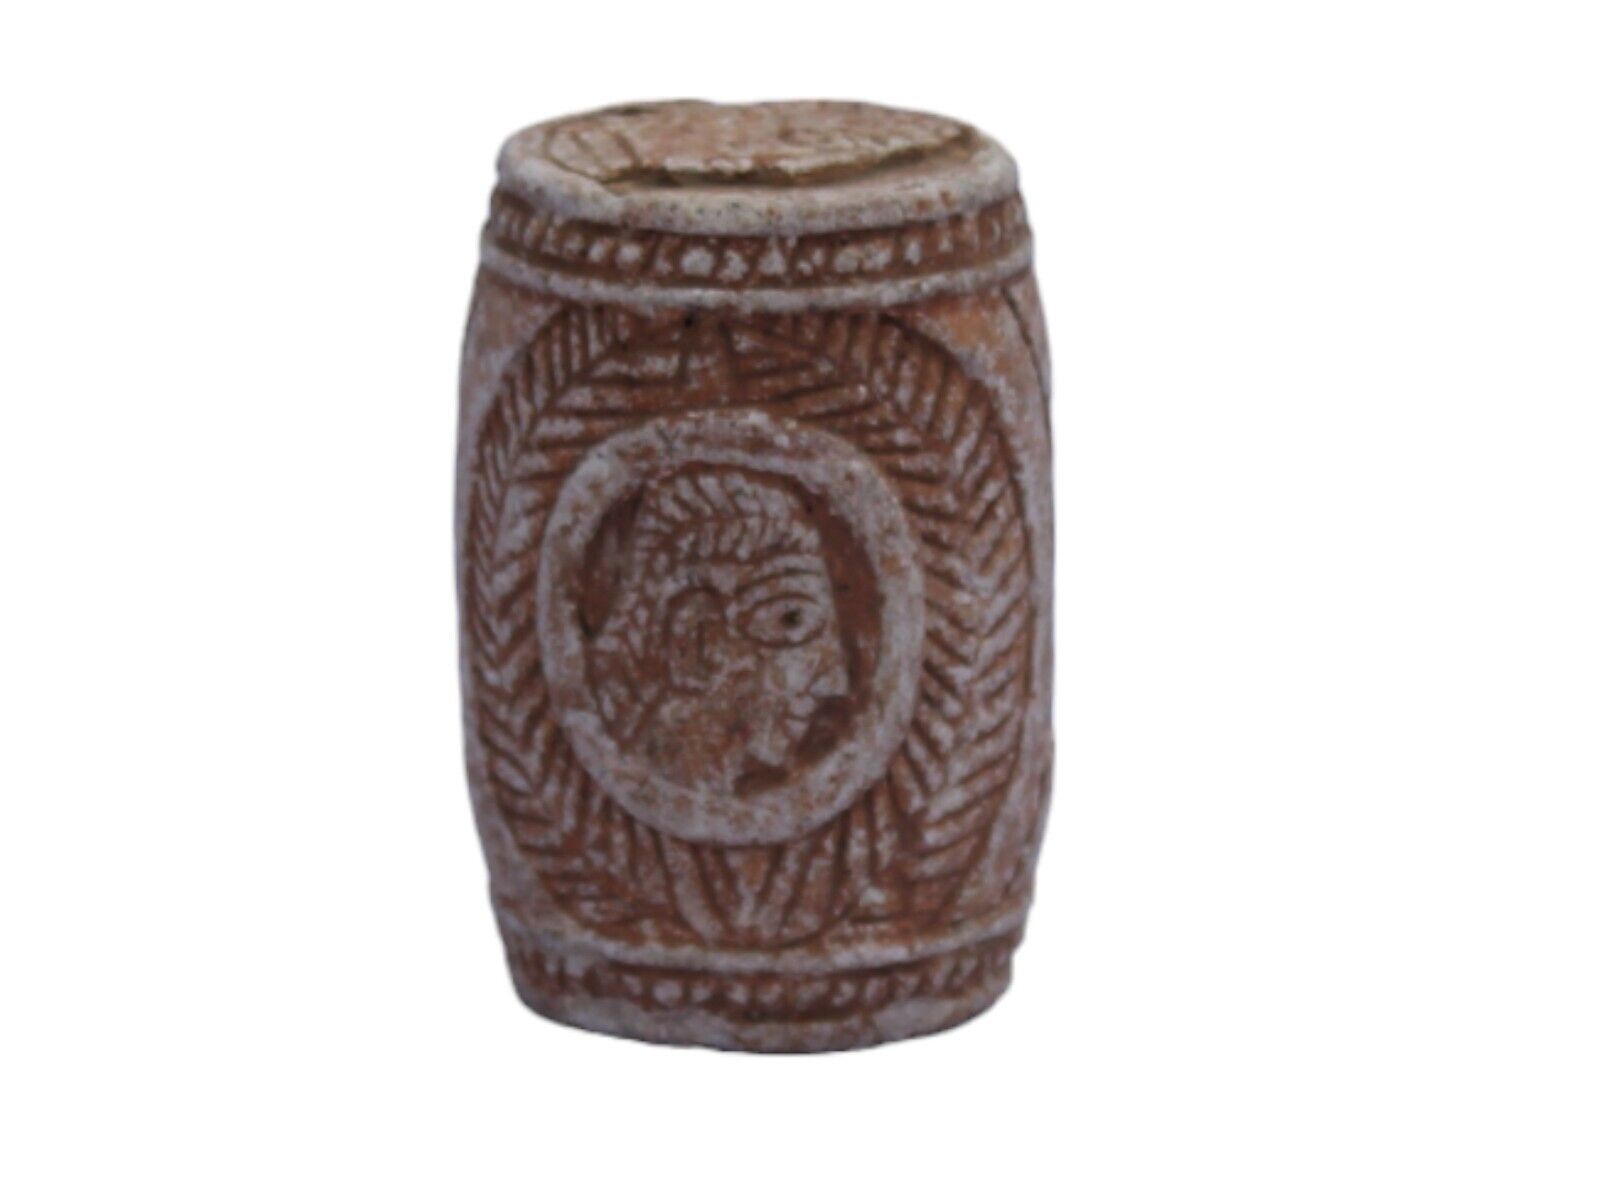 Antique Ethiopian Stone Seal from Axum. A beautiful Historical stone carving.